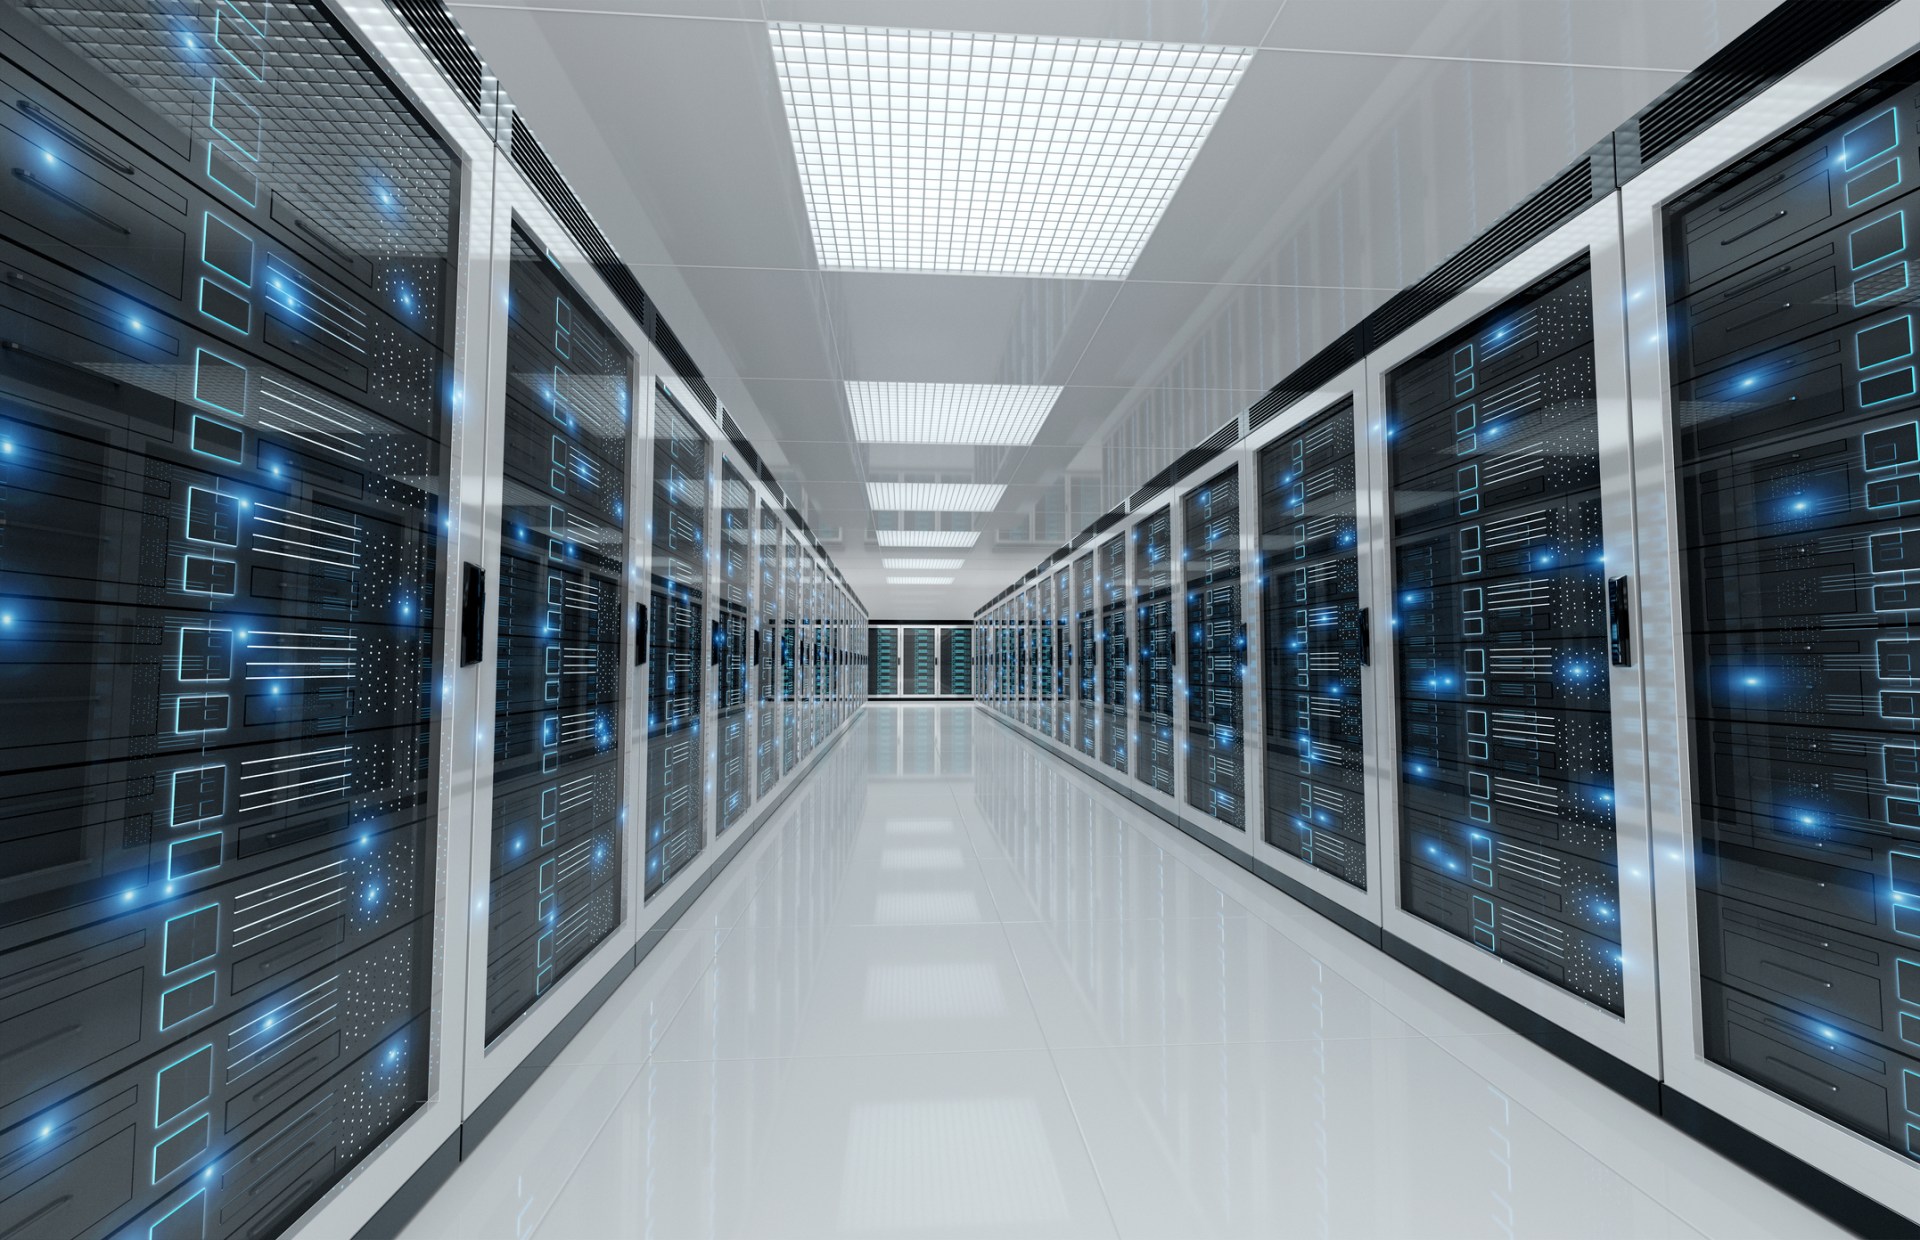 Big Data Storage Use In Data Centers Globally 2015-2024